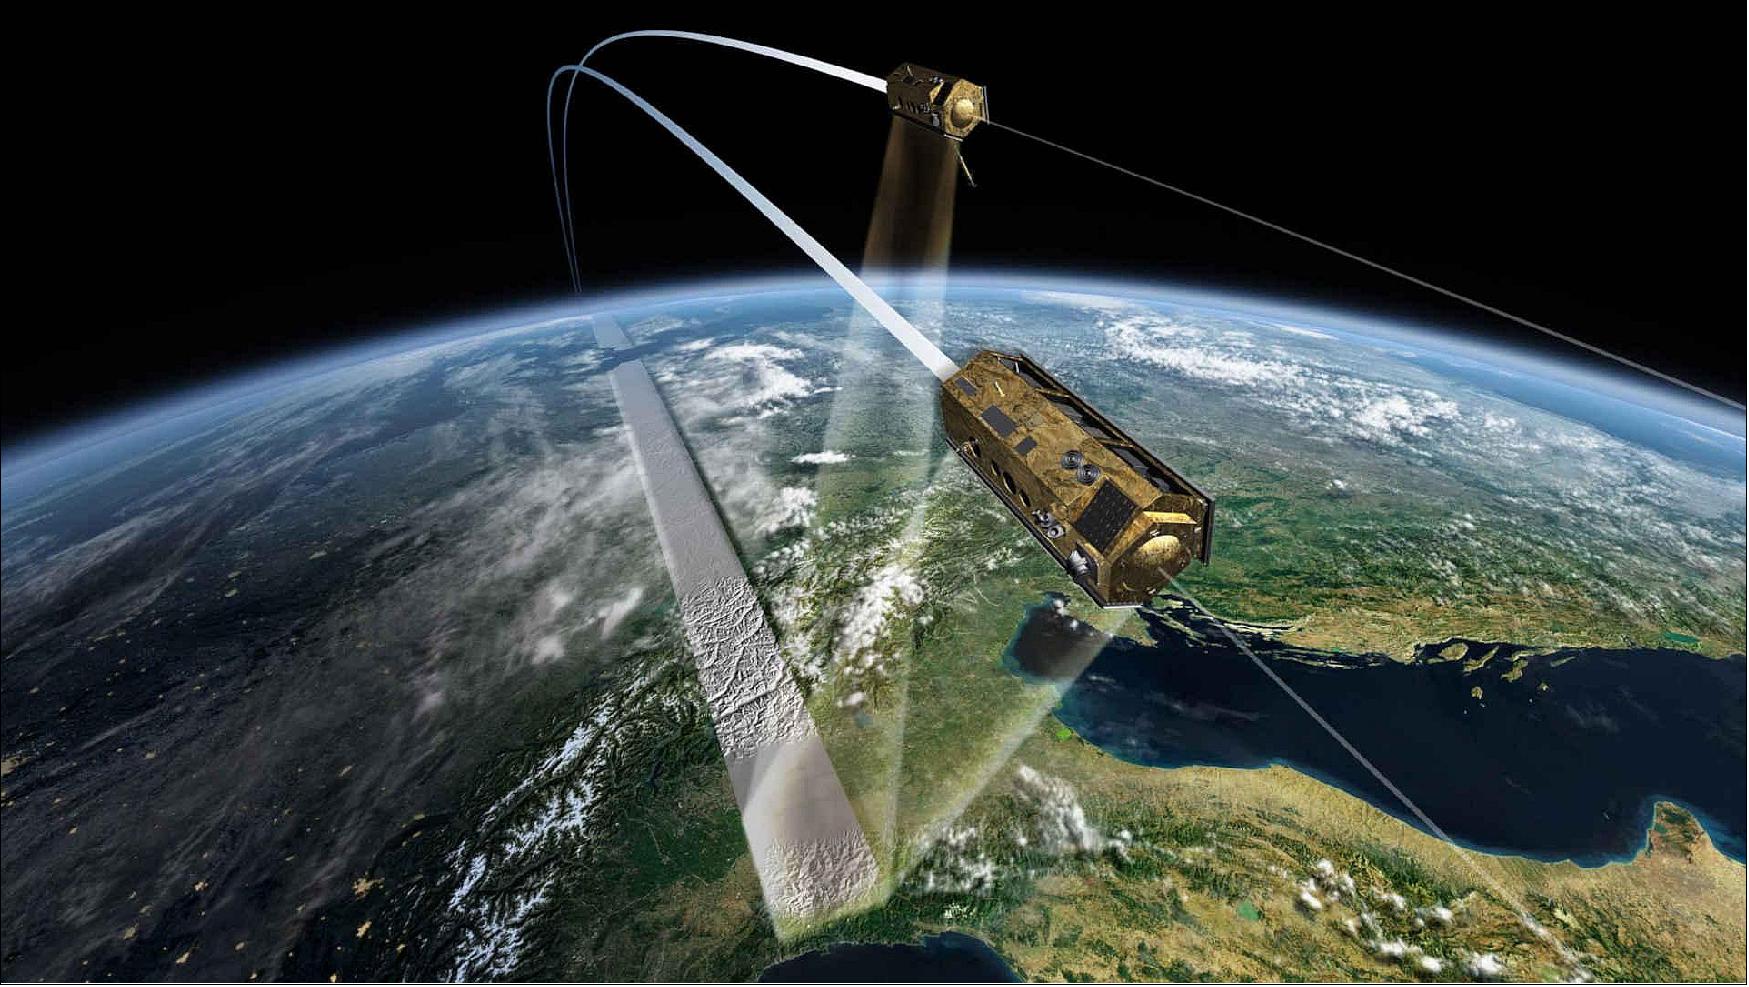 Figure 9: The TerraSAR-X and TanDEM-X satellites in formation flight [image credit: DLR (CC BY-NC-ND 3.0)]